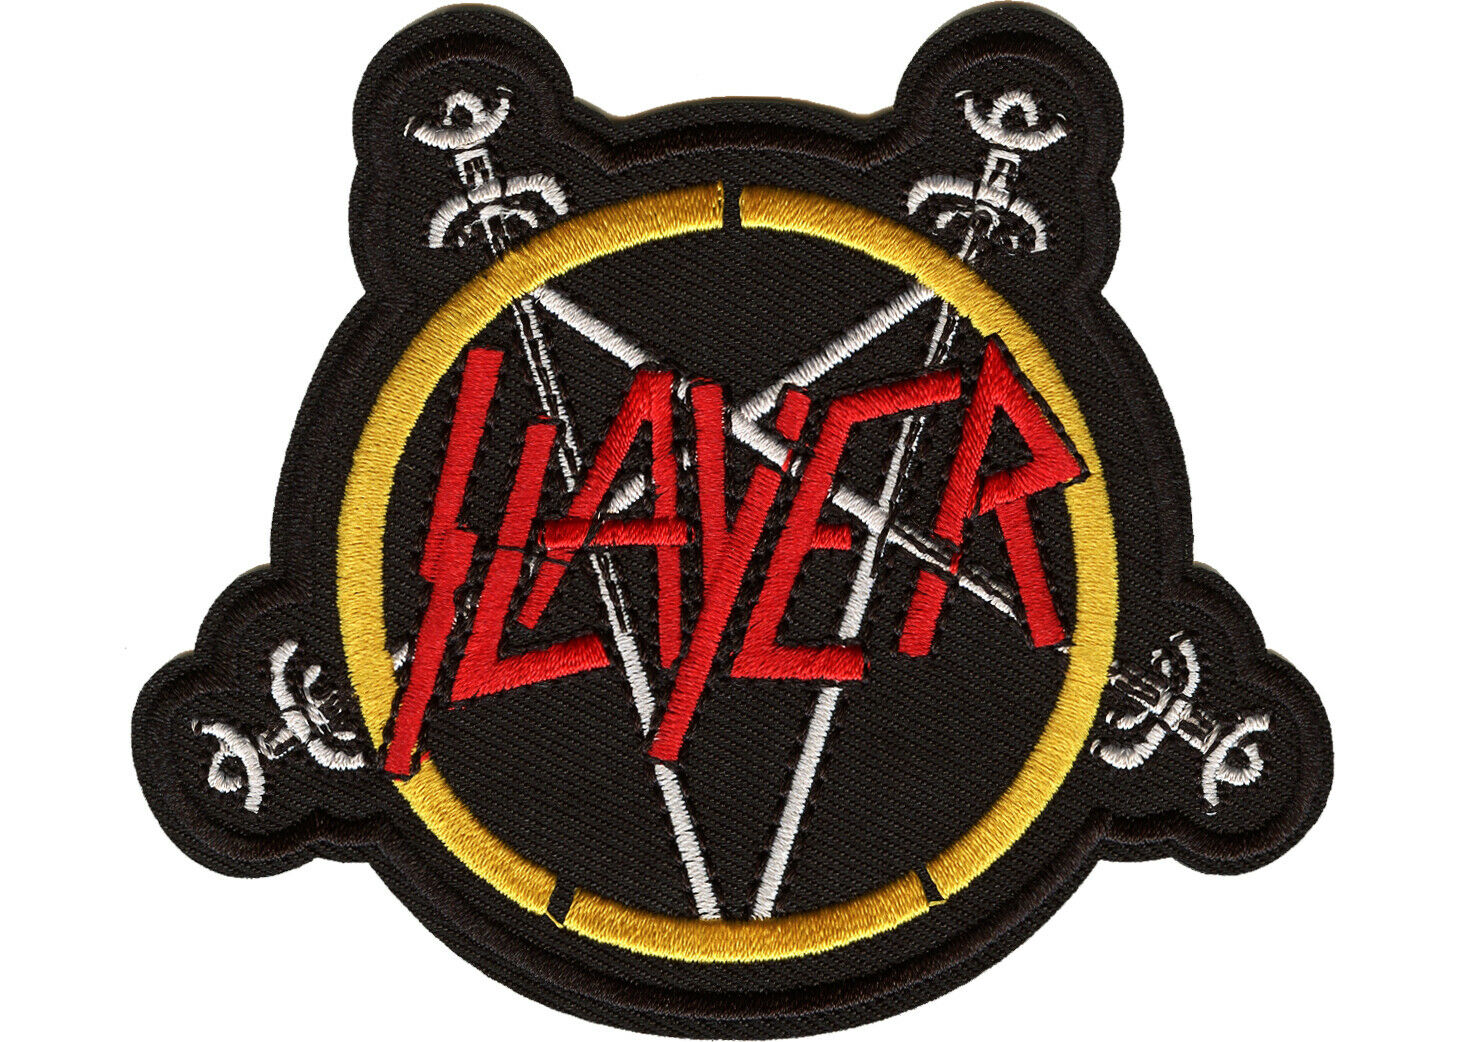 Slayer (4X3, Patch) embroidered, sew, iron, thrash metal, rock band patch, NEW